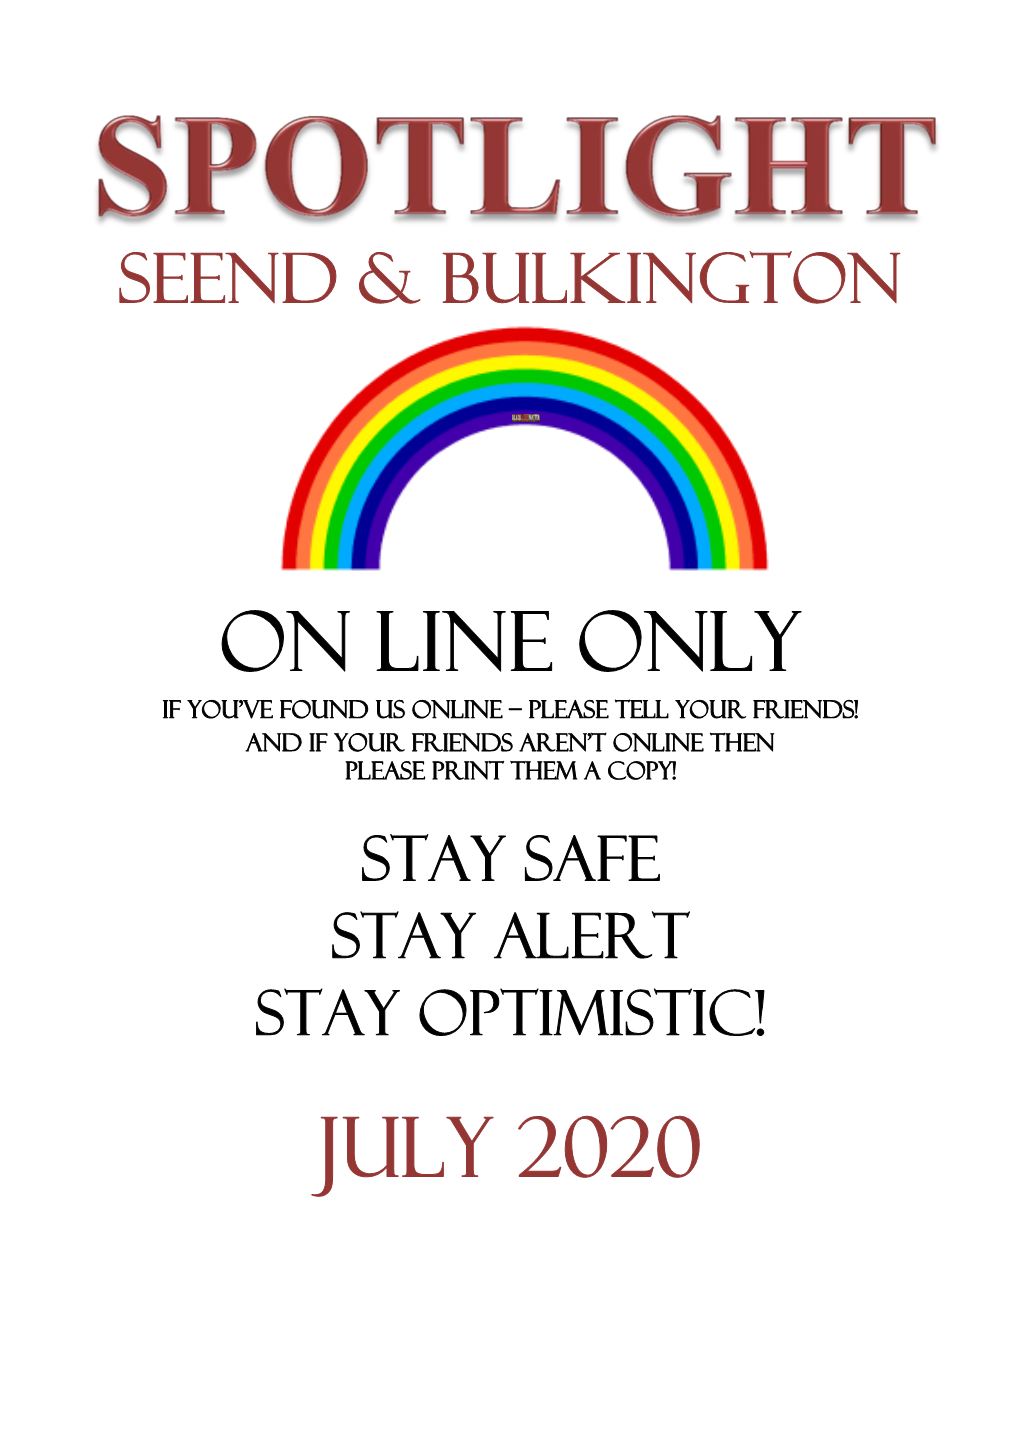 ON Line ONLY JULY 2020